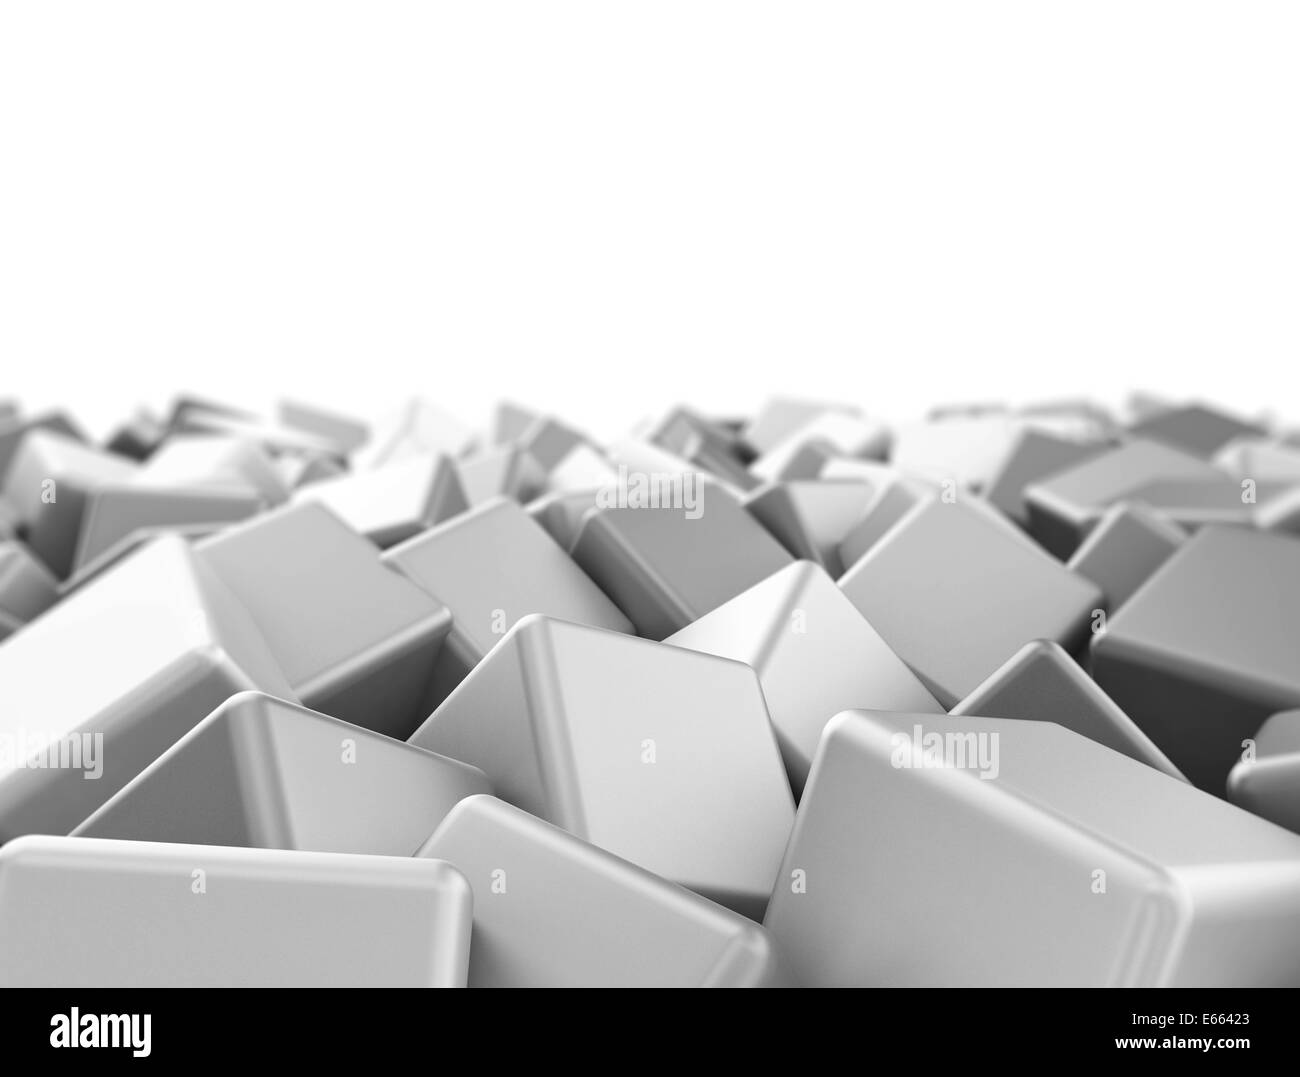 Abstract cluster of metal cubes isolated on white background Stock Photo